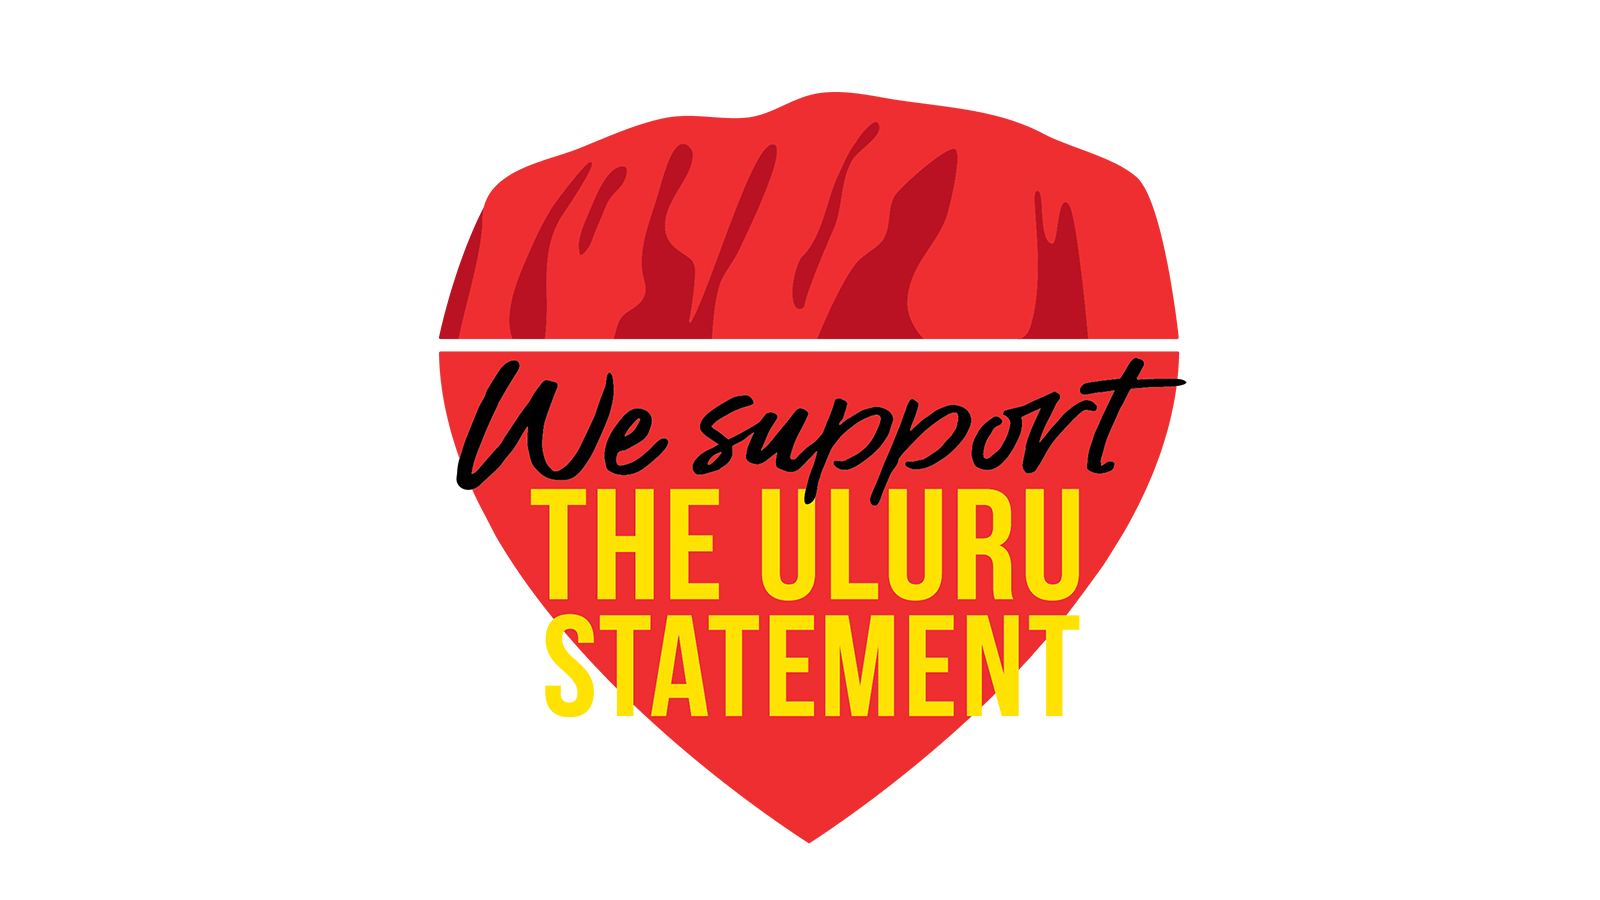 A graphic of Uluru in the shape of a heart, with black and yellow text reading 'We support THE ULURU STATEMENT'